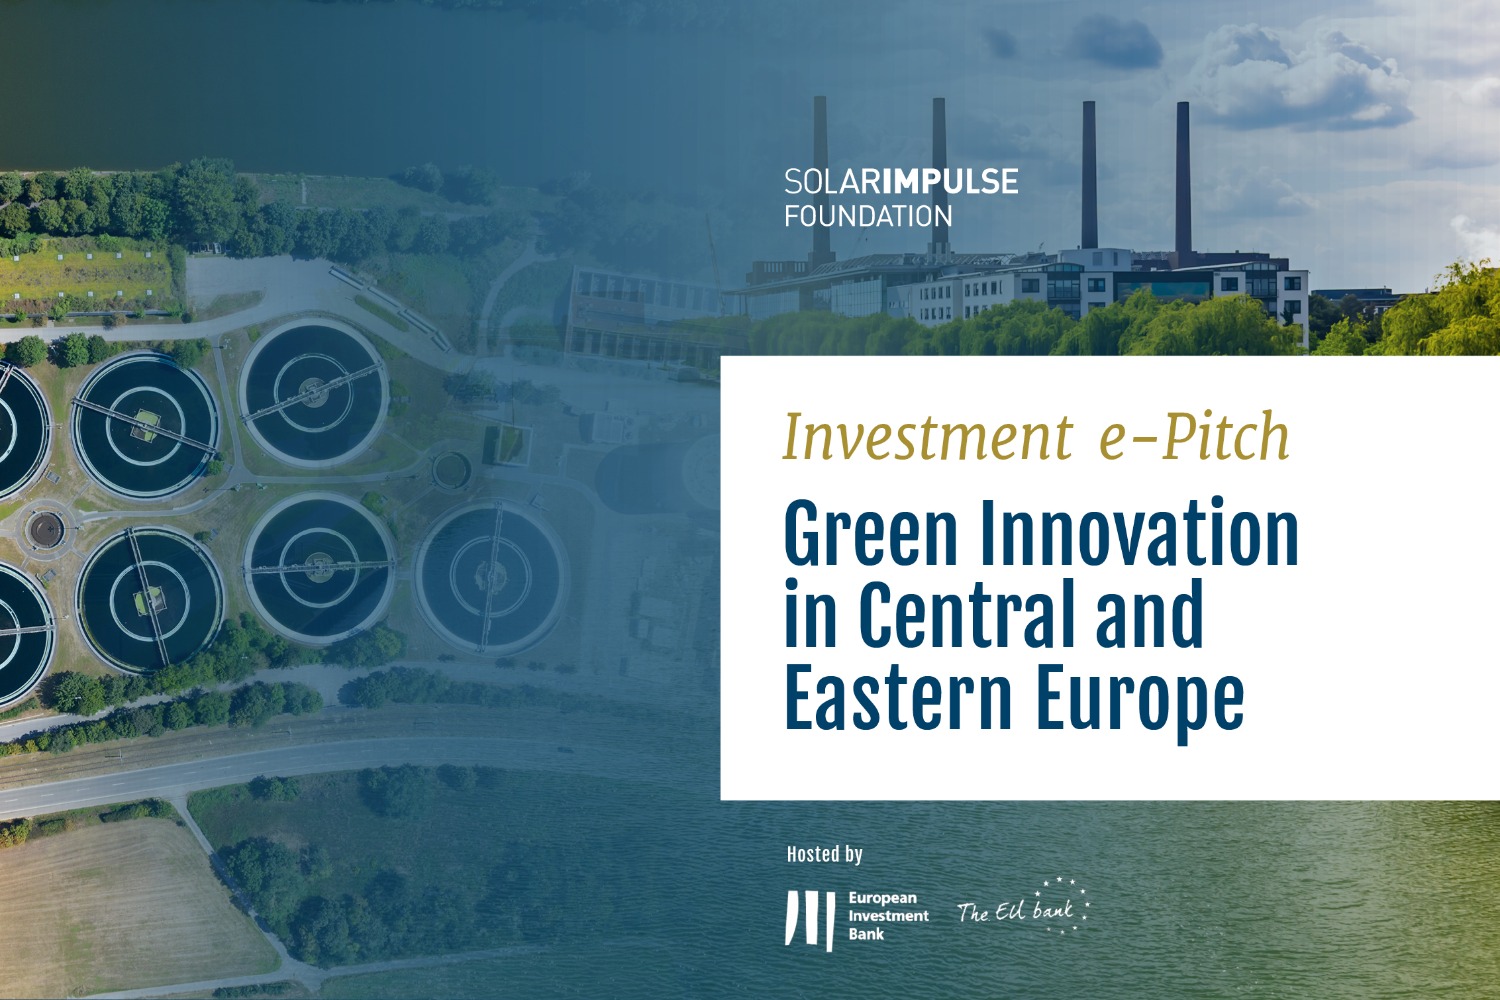 Solar Impulse Investment e-Pitch hosted by the European Investment Bank